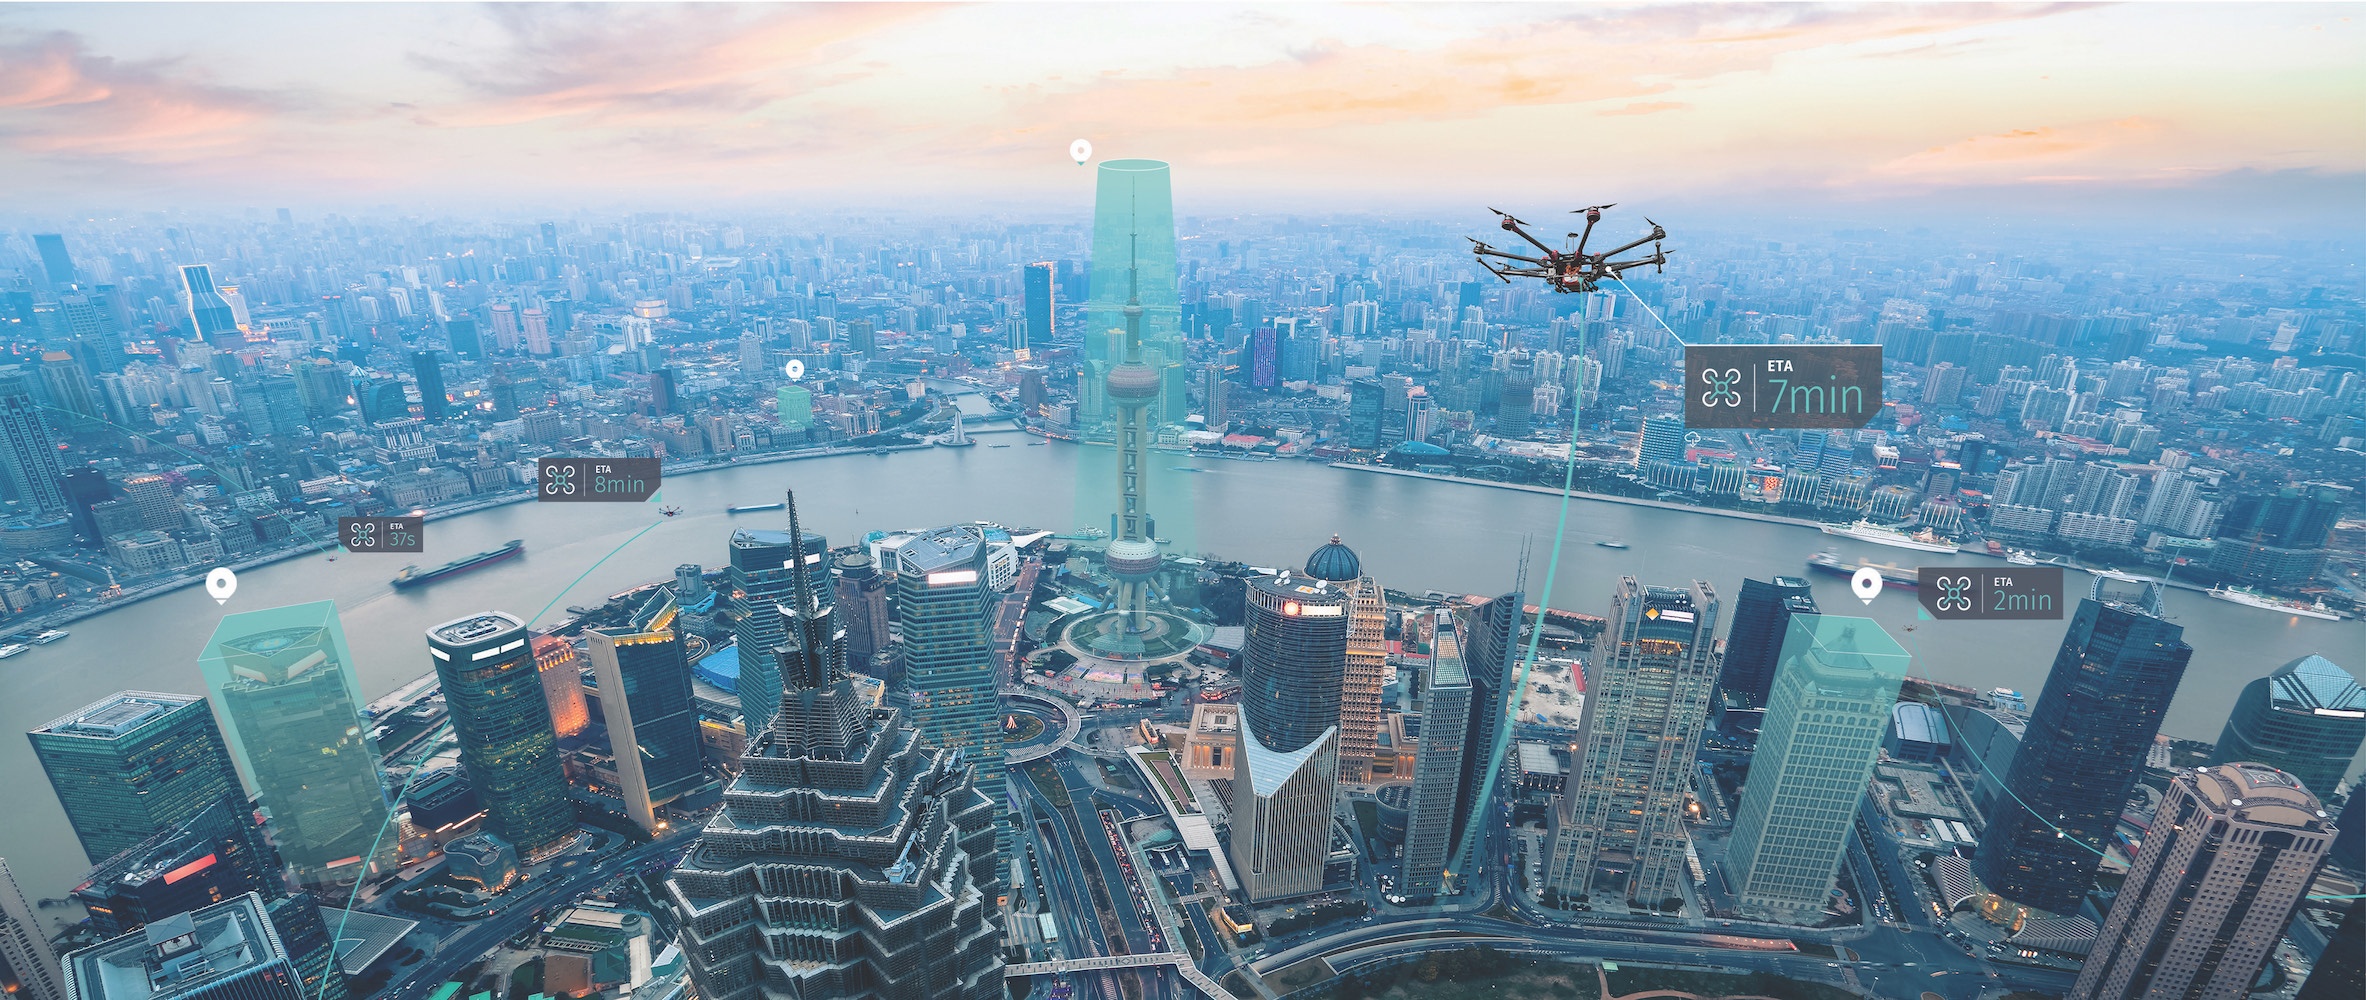 HERE and Unifly are mapping the airspace for drones, marking our no-fly zones such as airports, residential areas and sensitive government installations.jpeg